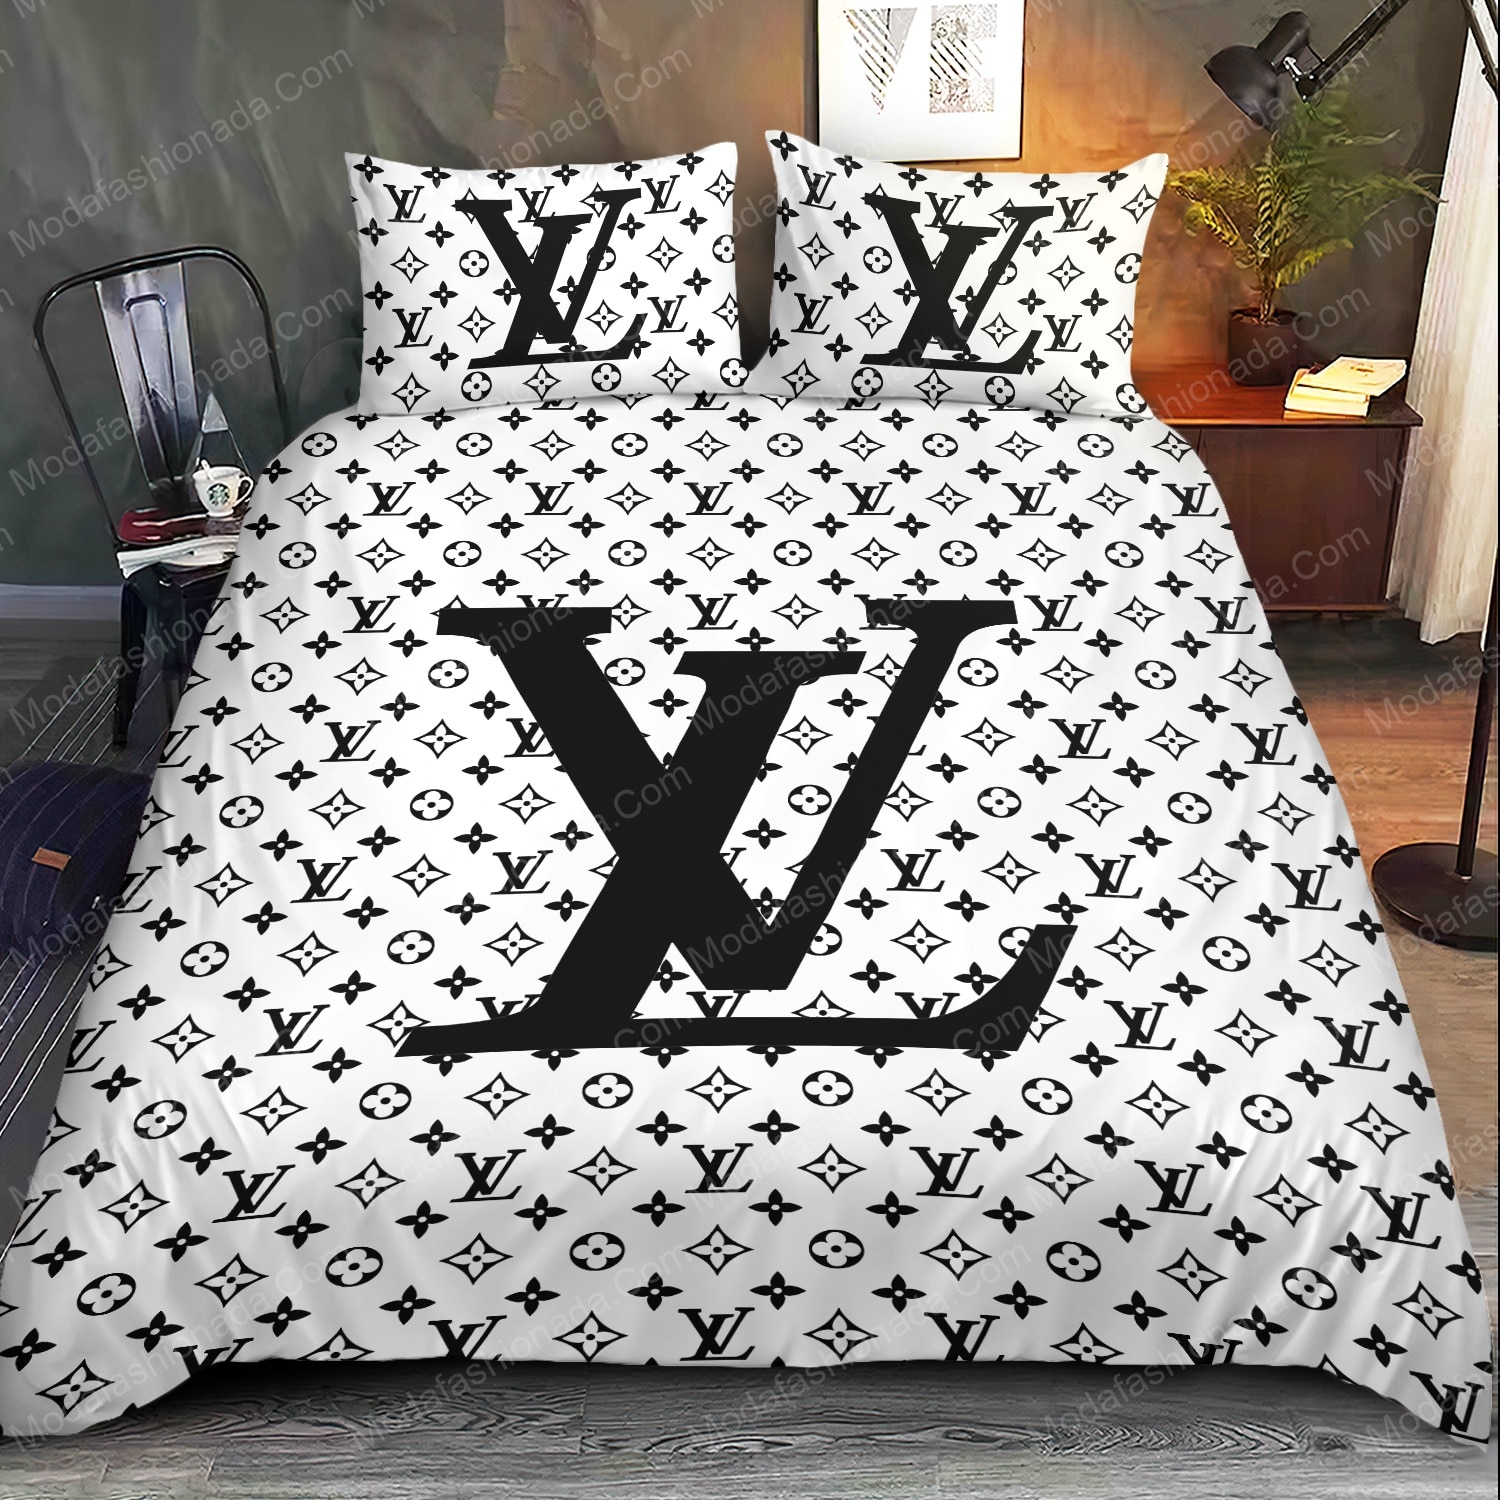 Buy Louis Vuitton Brands 14 Bedding Set Bed Sets With Twin, Full, Queen, King  Size